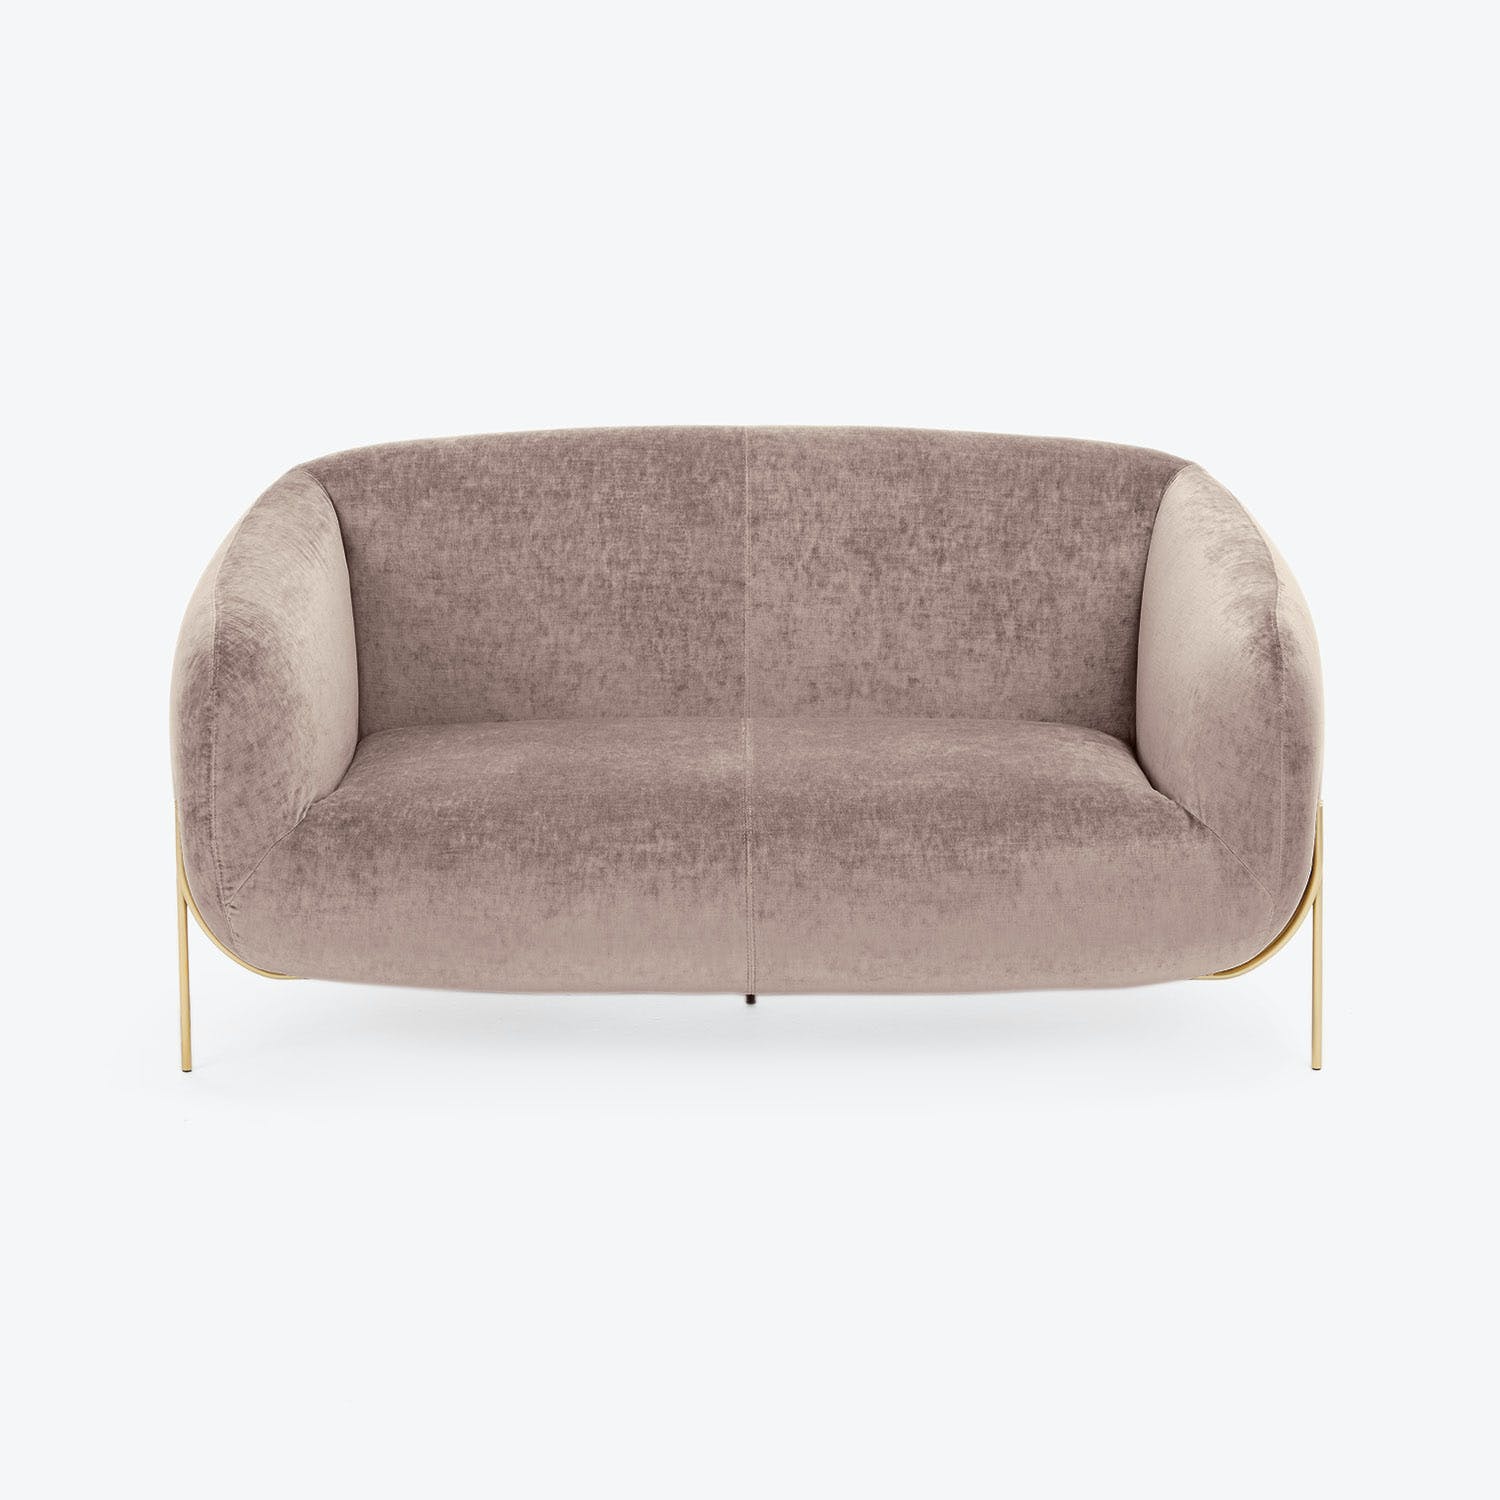 Minimalist modern sofa in blush-tone upholstery exudes elegance and comfort.